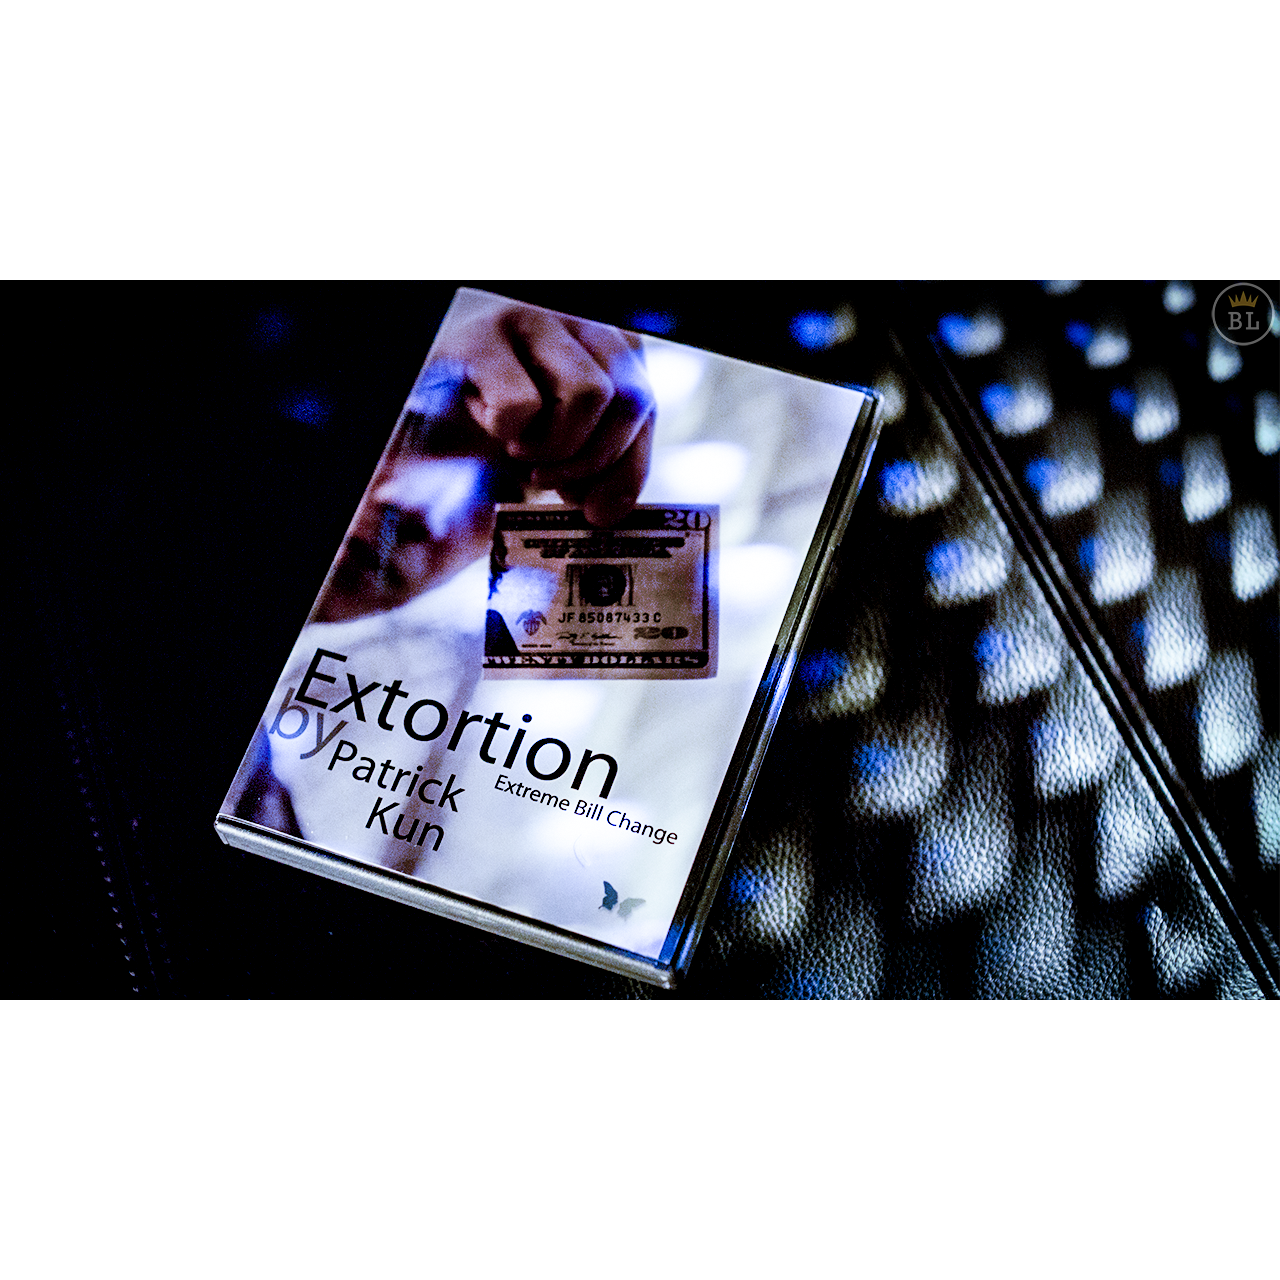 Extortion (DVD and Gimmick) by Patrick Kun and SansMinds DVD